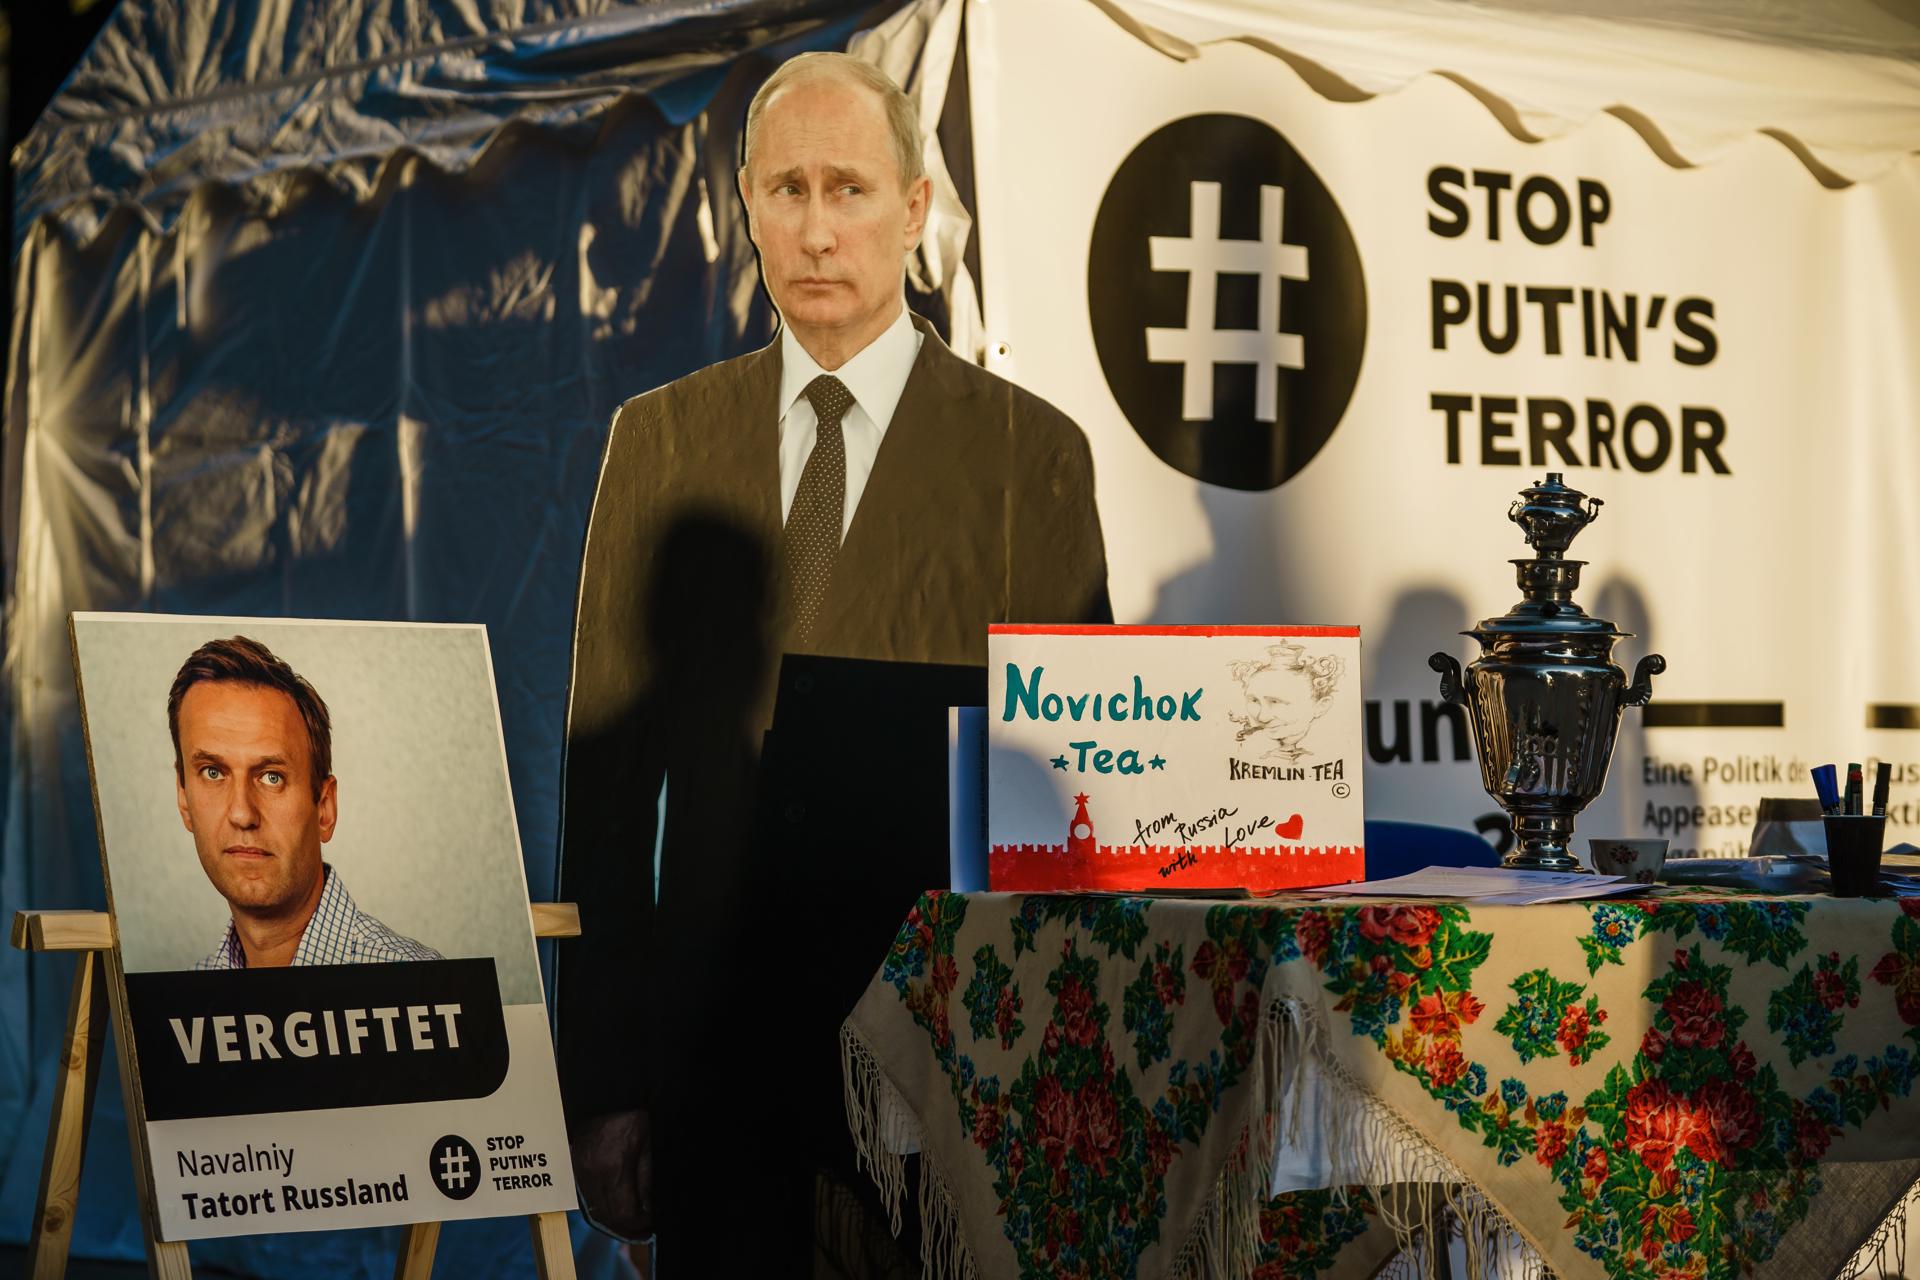 A file picture shows a protest demonstration in front of the Russian embassy with pictures of President Vladimir Putin and Russian opposition activist Alexei Navalny and a Russian teapot samovar with a note reading 'Novichok tea', 'Kremlin tea' and 'from Russia with love', in Berlin, Germany, 16 September 2020. EFE-EPA/FILE/CLEMENS BILAN